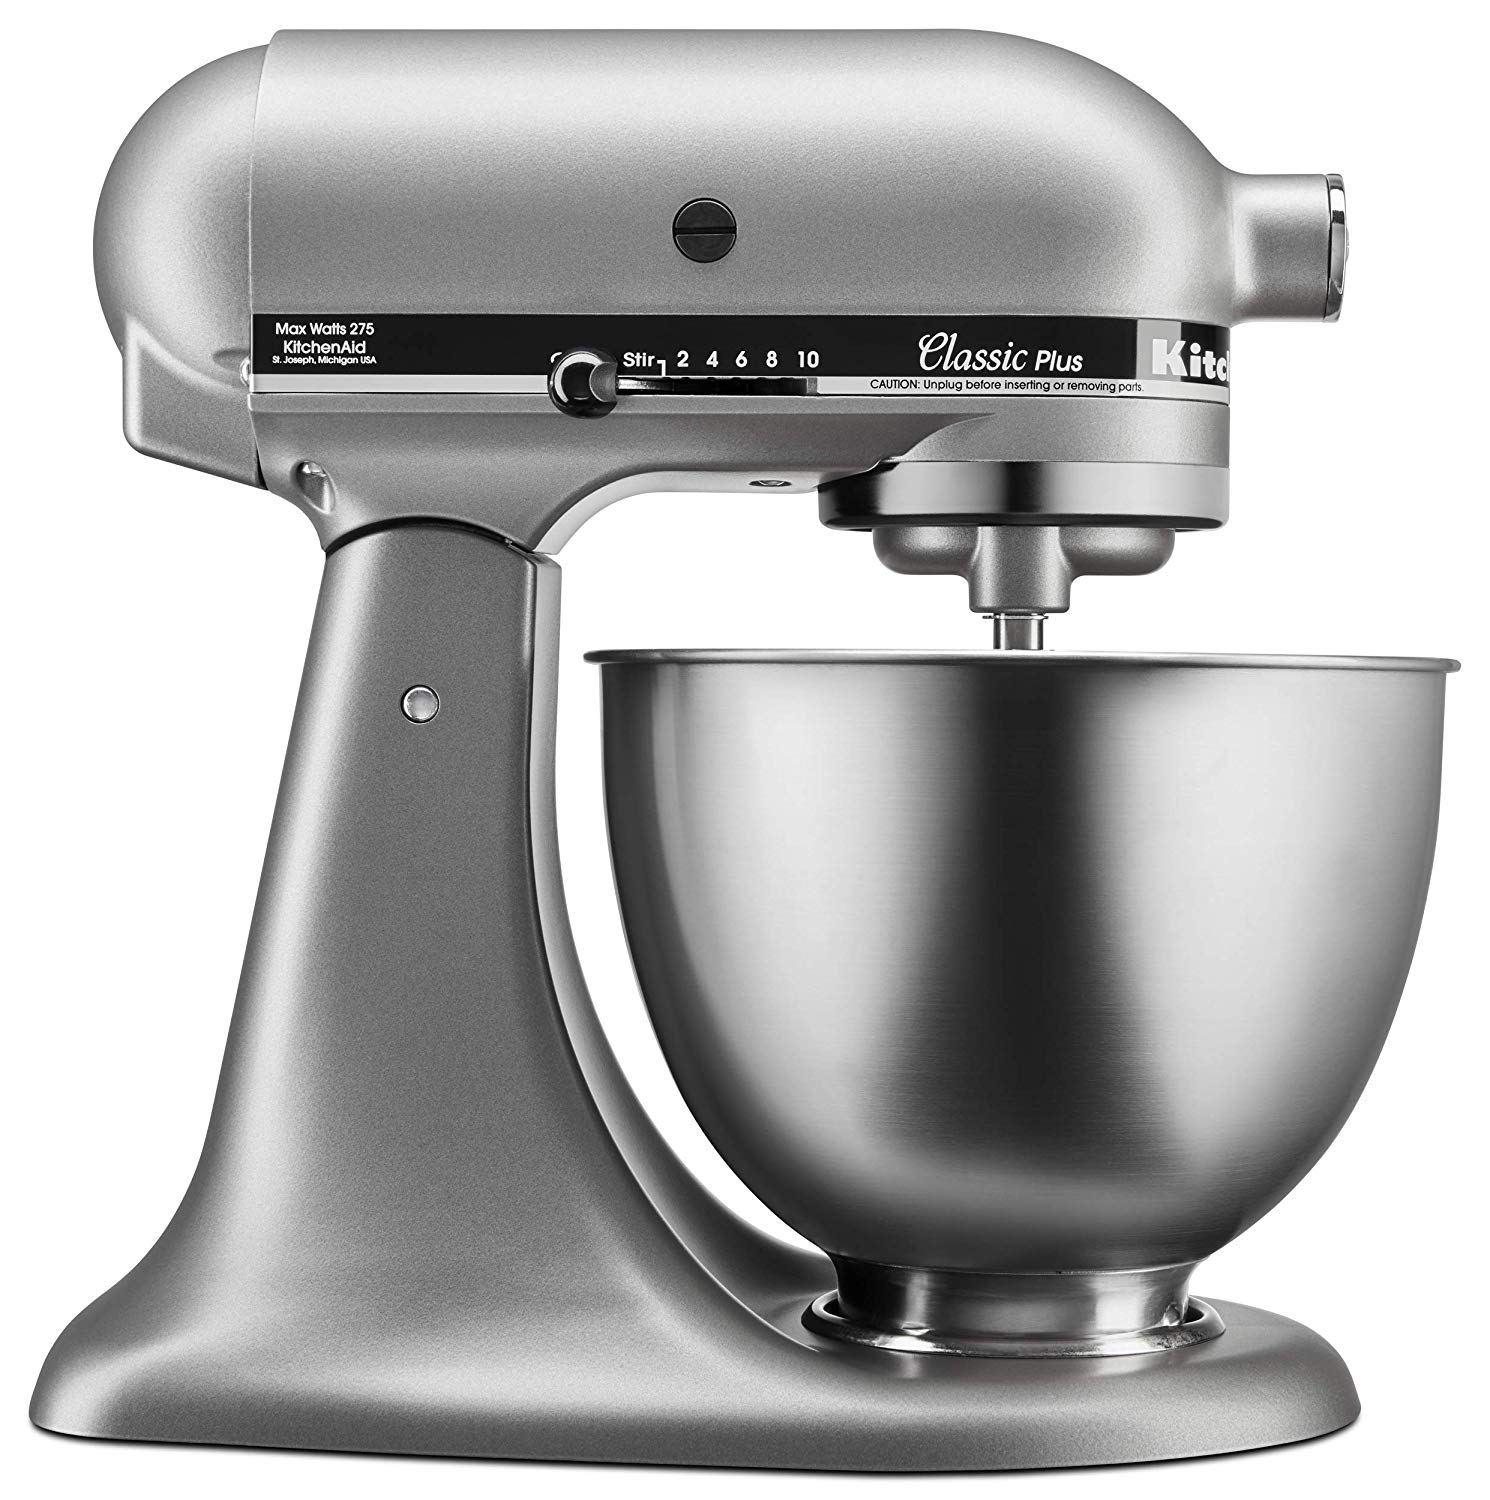 Small Kitchen Aid Mixer - 4.8L Artisan Stand Mixer + Flex Edge Beater KSM177 ... : Equipped with professional features that make cooking fun and easy, kitchen stand mixers come with many different kinds of motors and accessories depending on your cooking needs.